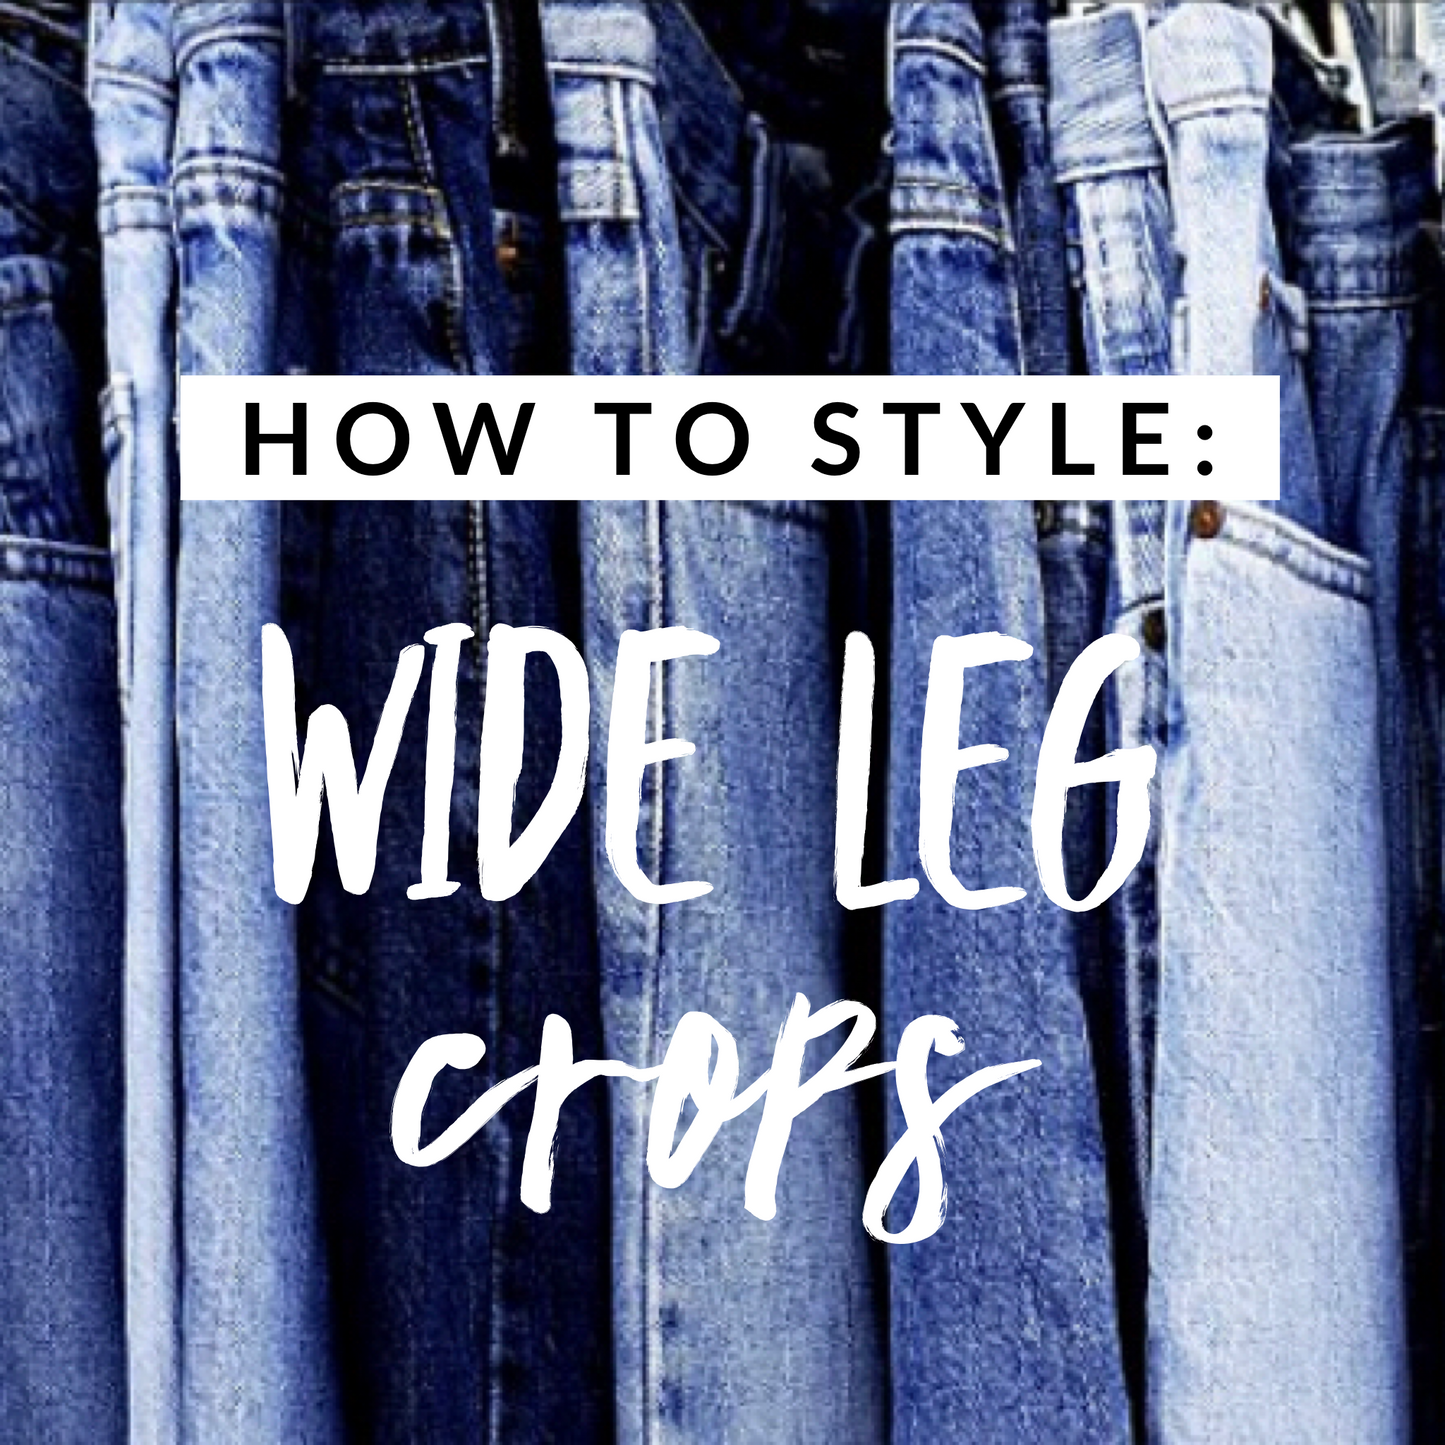 how to style wide leg cropped pants